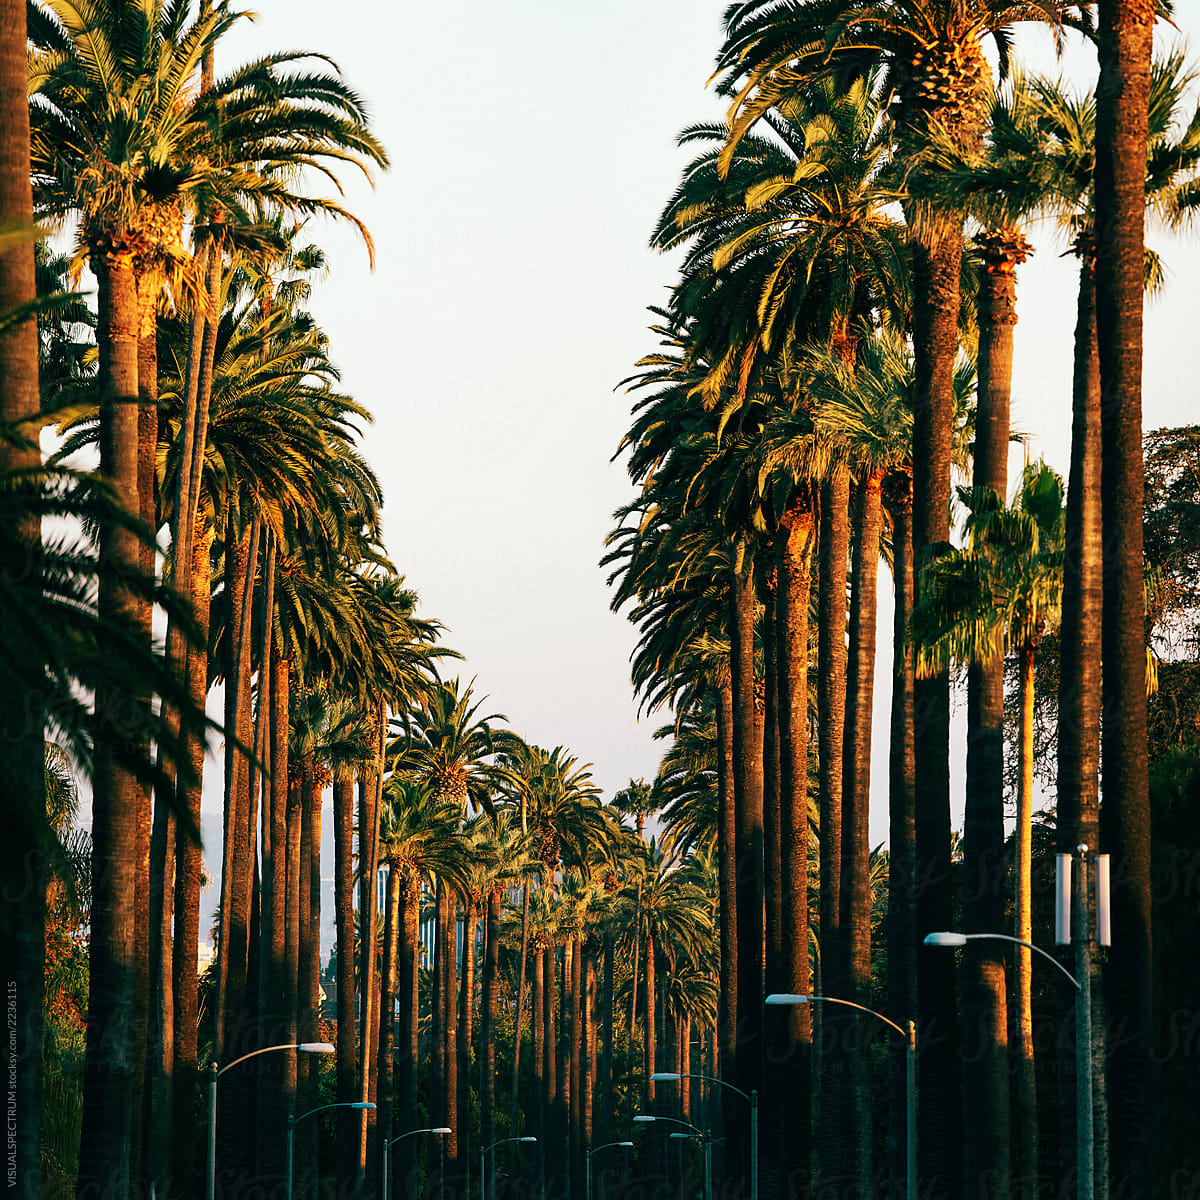 Los Angeles Palm Trees in Warm Sunset Light